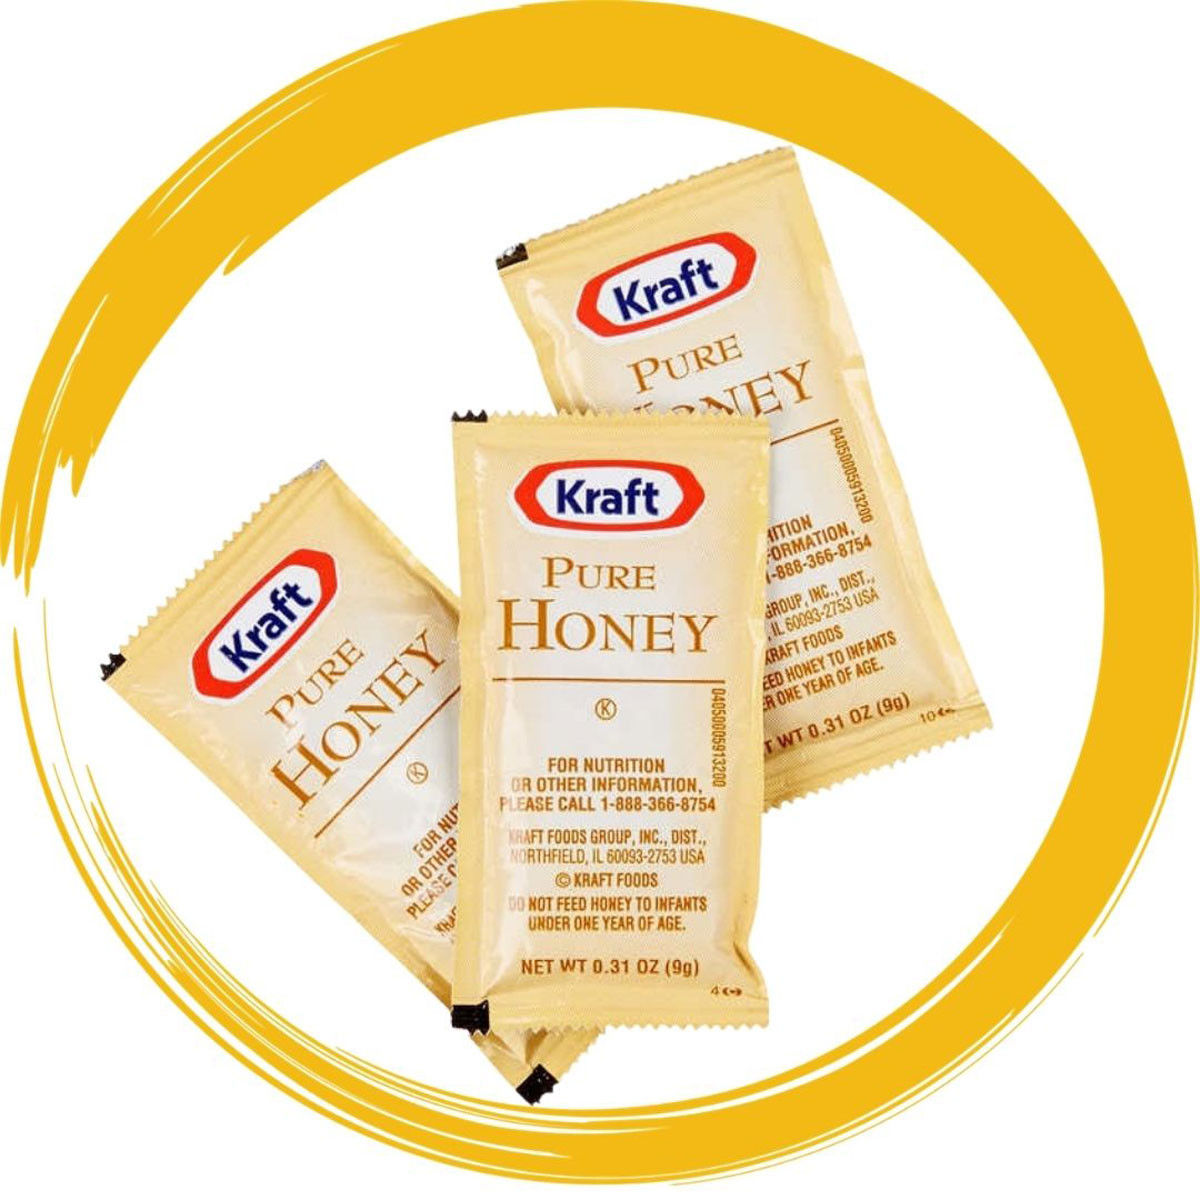 Kraft Pure Honey Packets Questions & Answers